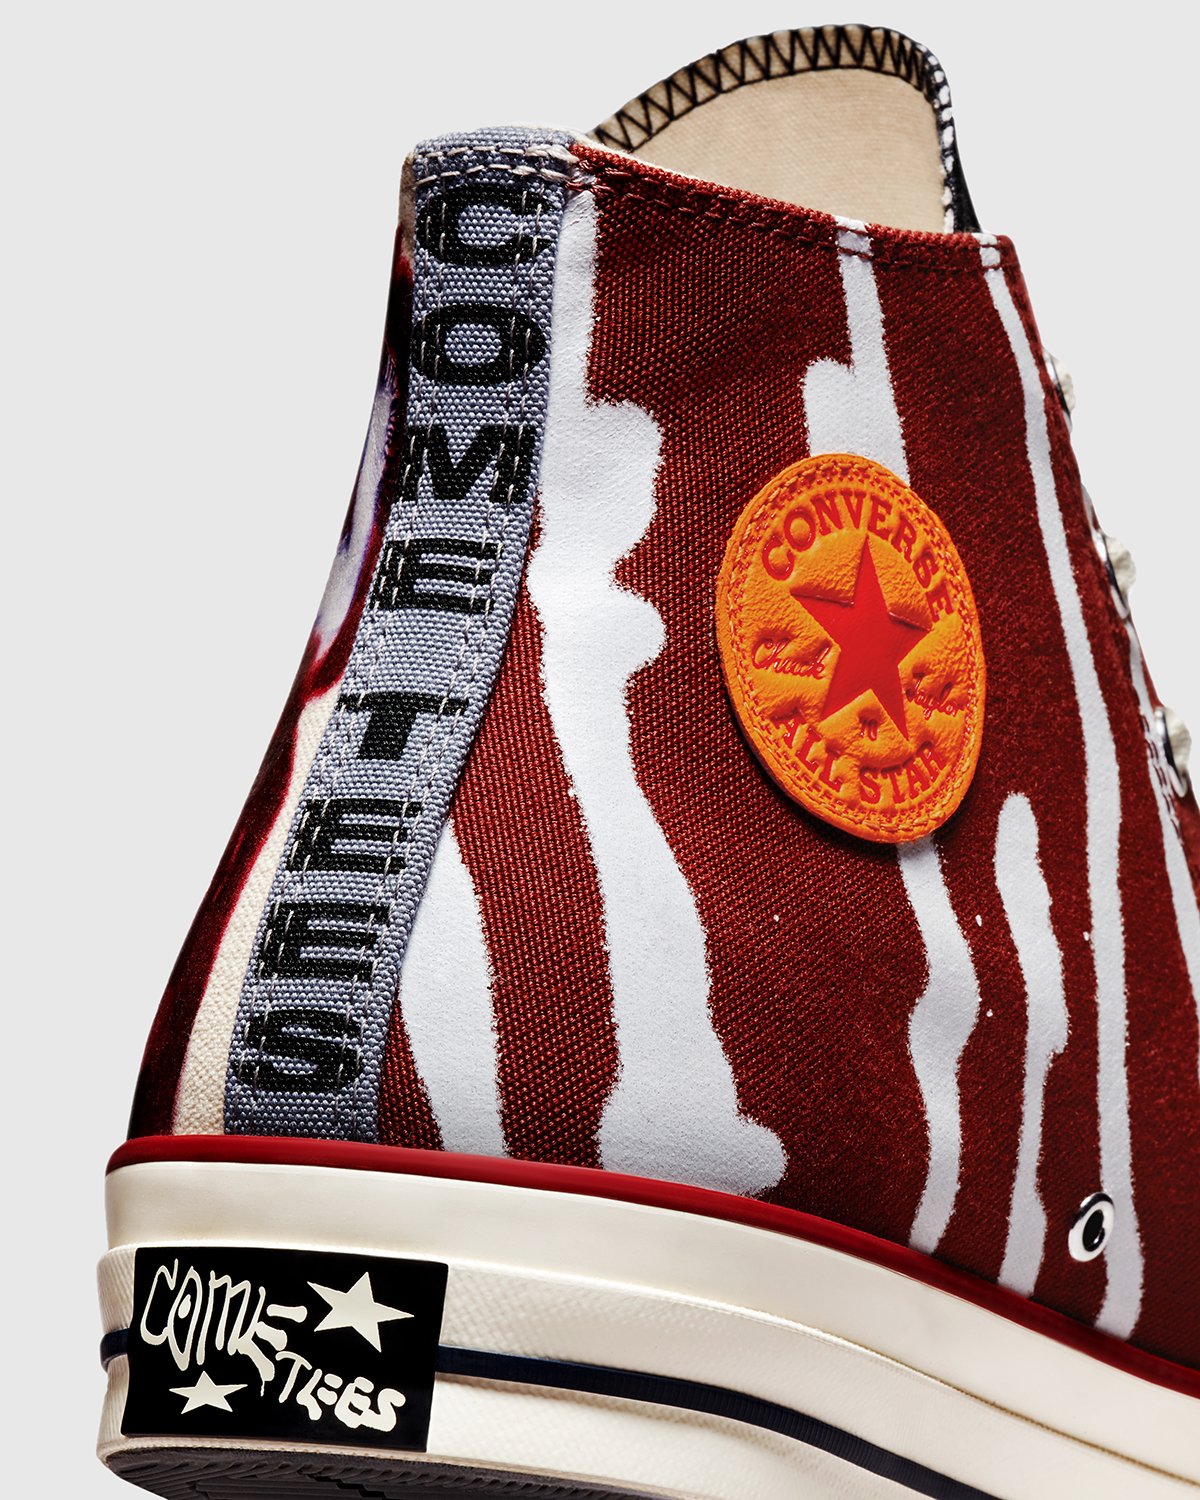 Converse x Come Tees - Chuck 70 Hi White/Multi/Egret - Footwear - Red - Image 5